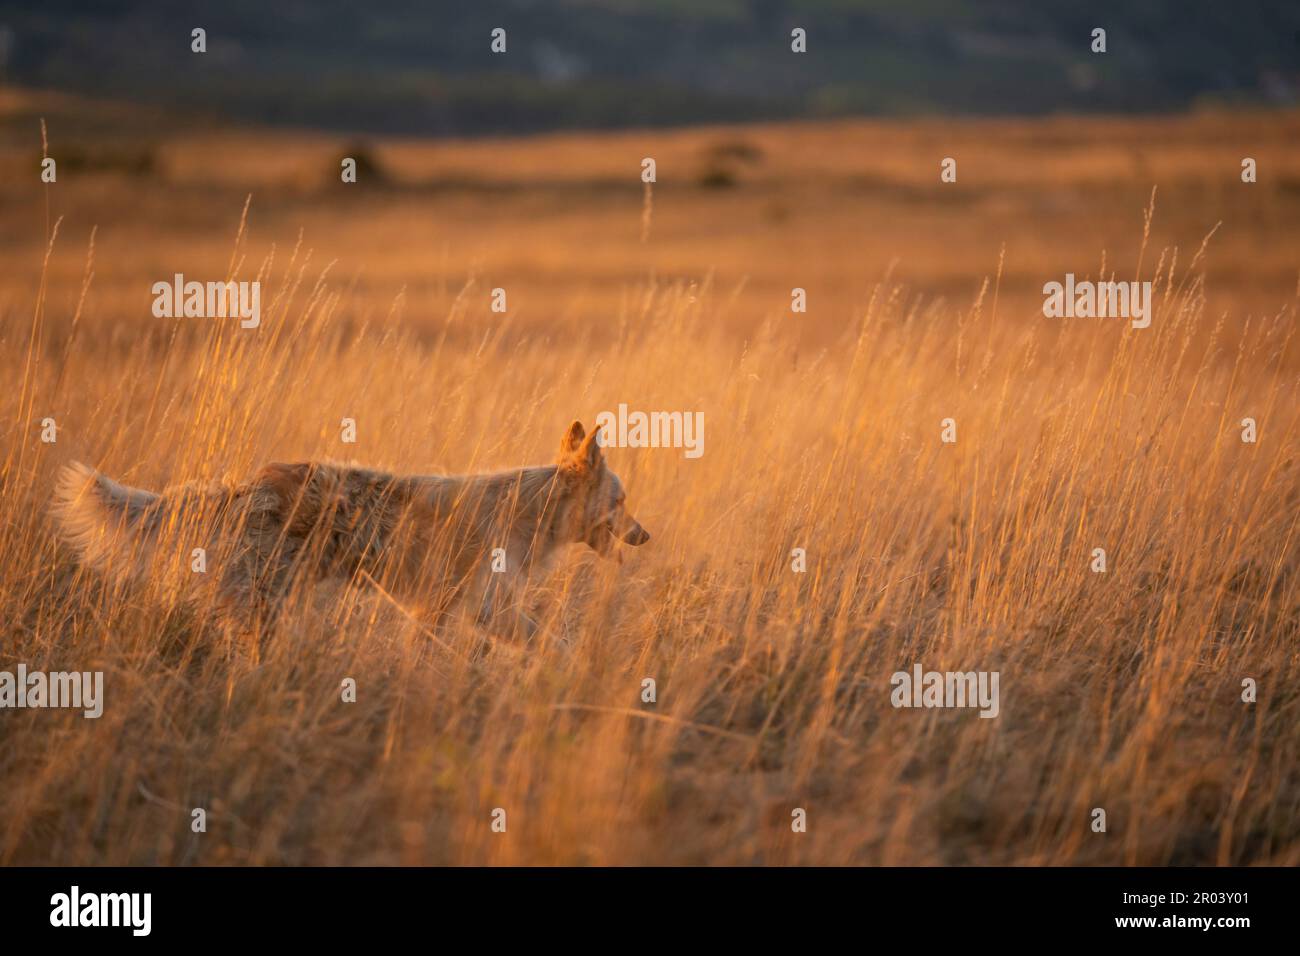 Working herding dog among yellow grass at sunset. Orange colored field. Meadow in the background. Stock Photo